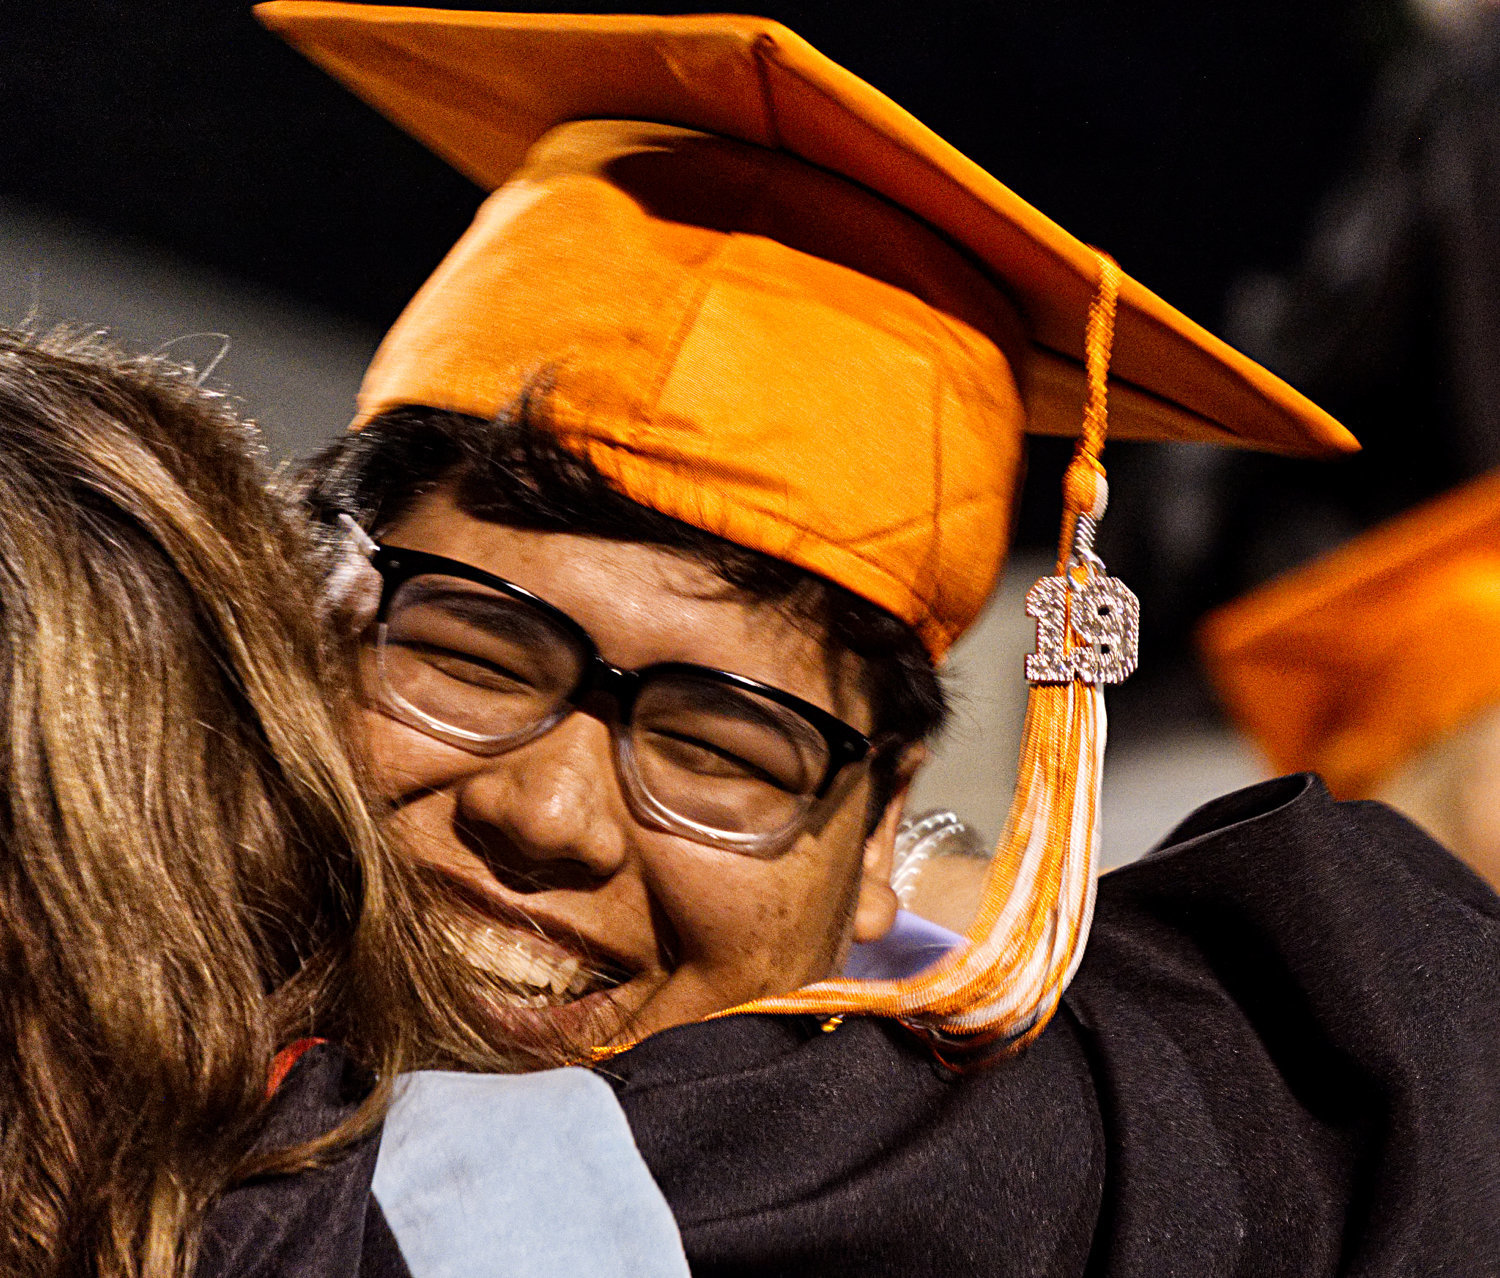 Armando Veloz gives one of his teachers a hug after receiving his diploma.